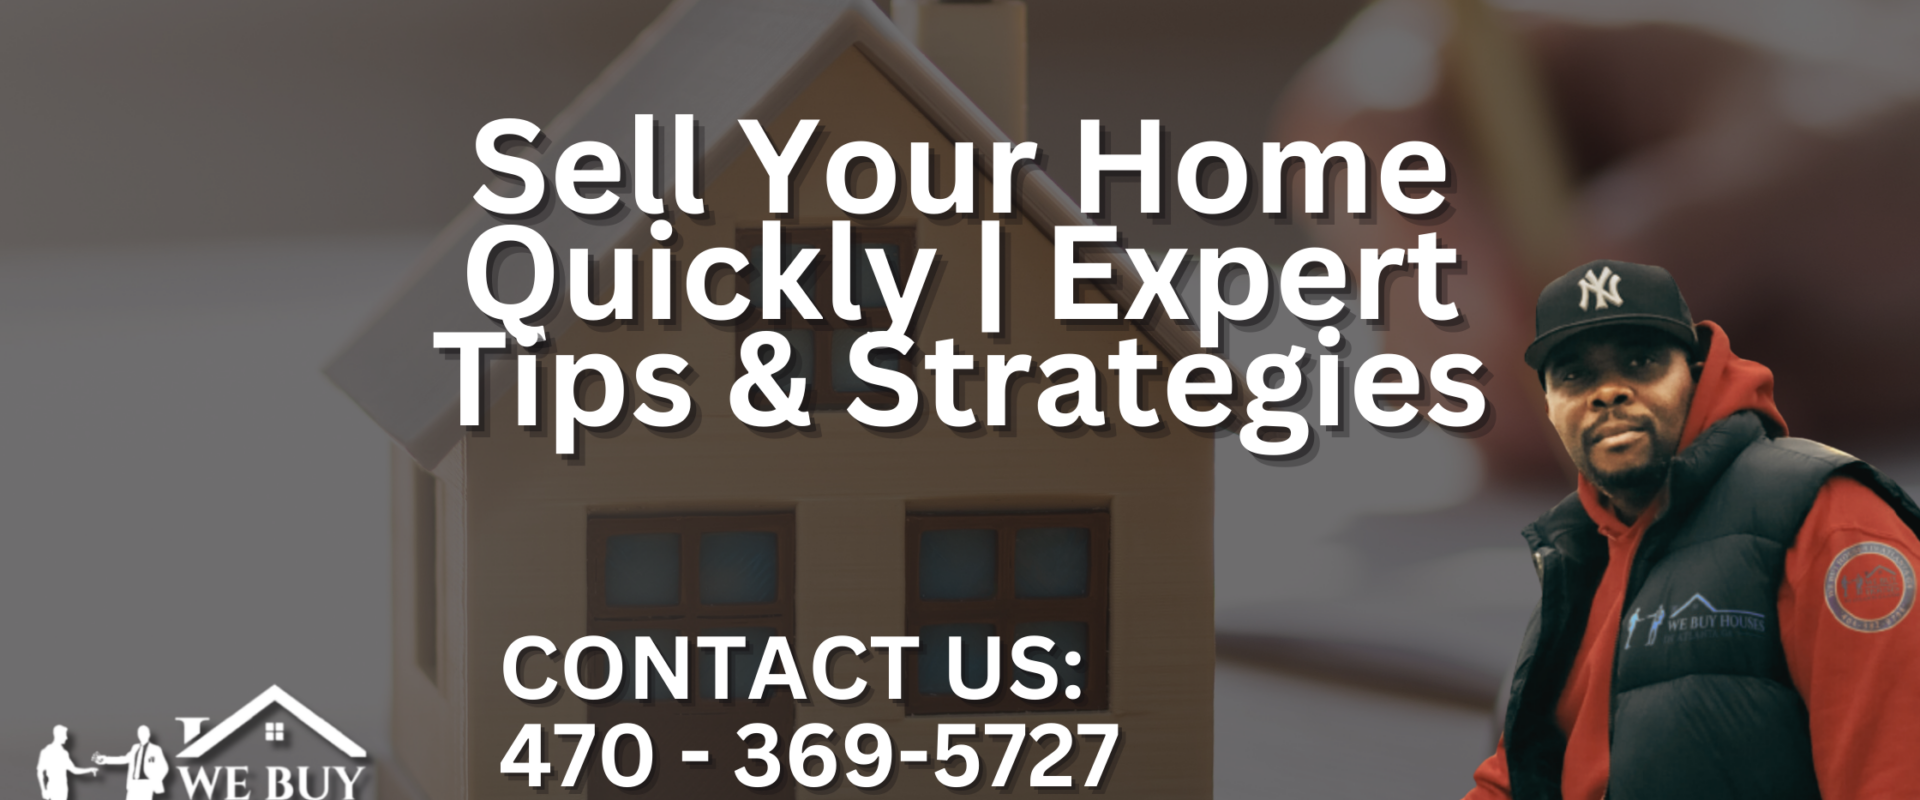 Sell-Your-Home-Quickly-Expert-Tips-Strategies-1